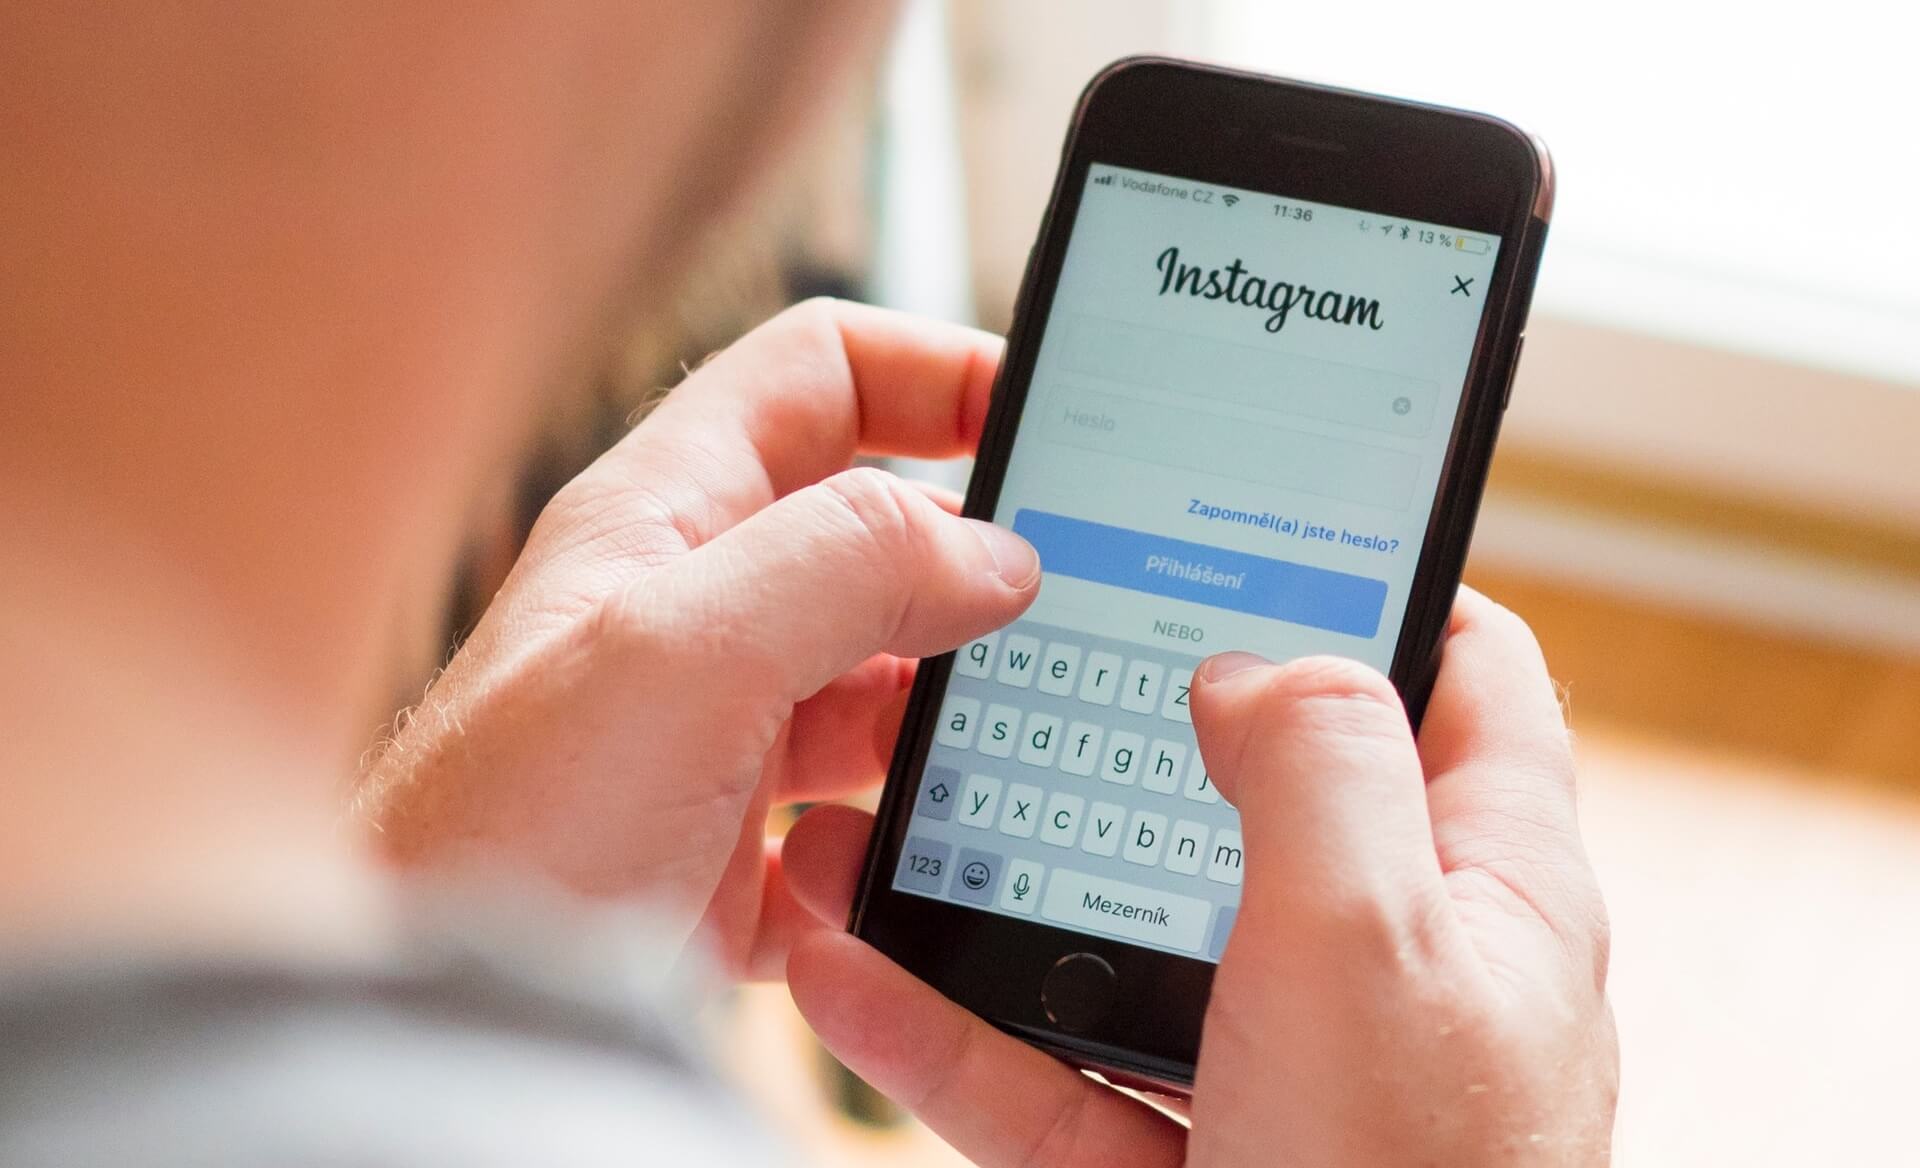 A man logs into Instagram on his cellphone